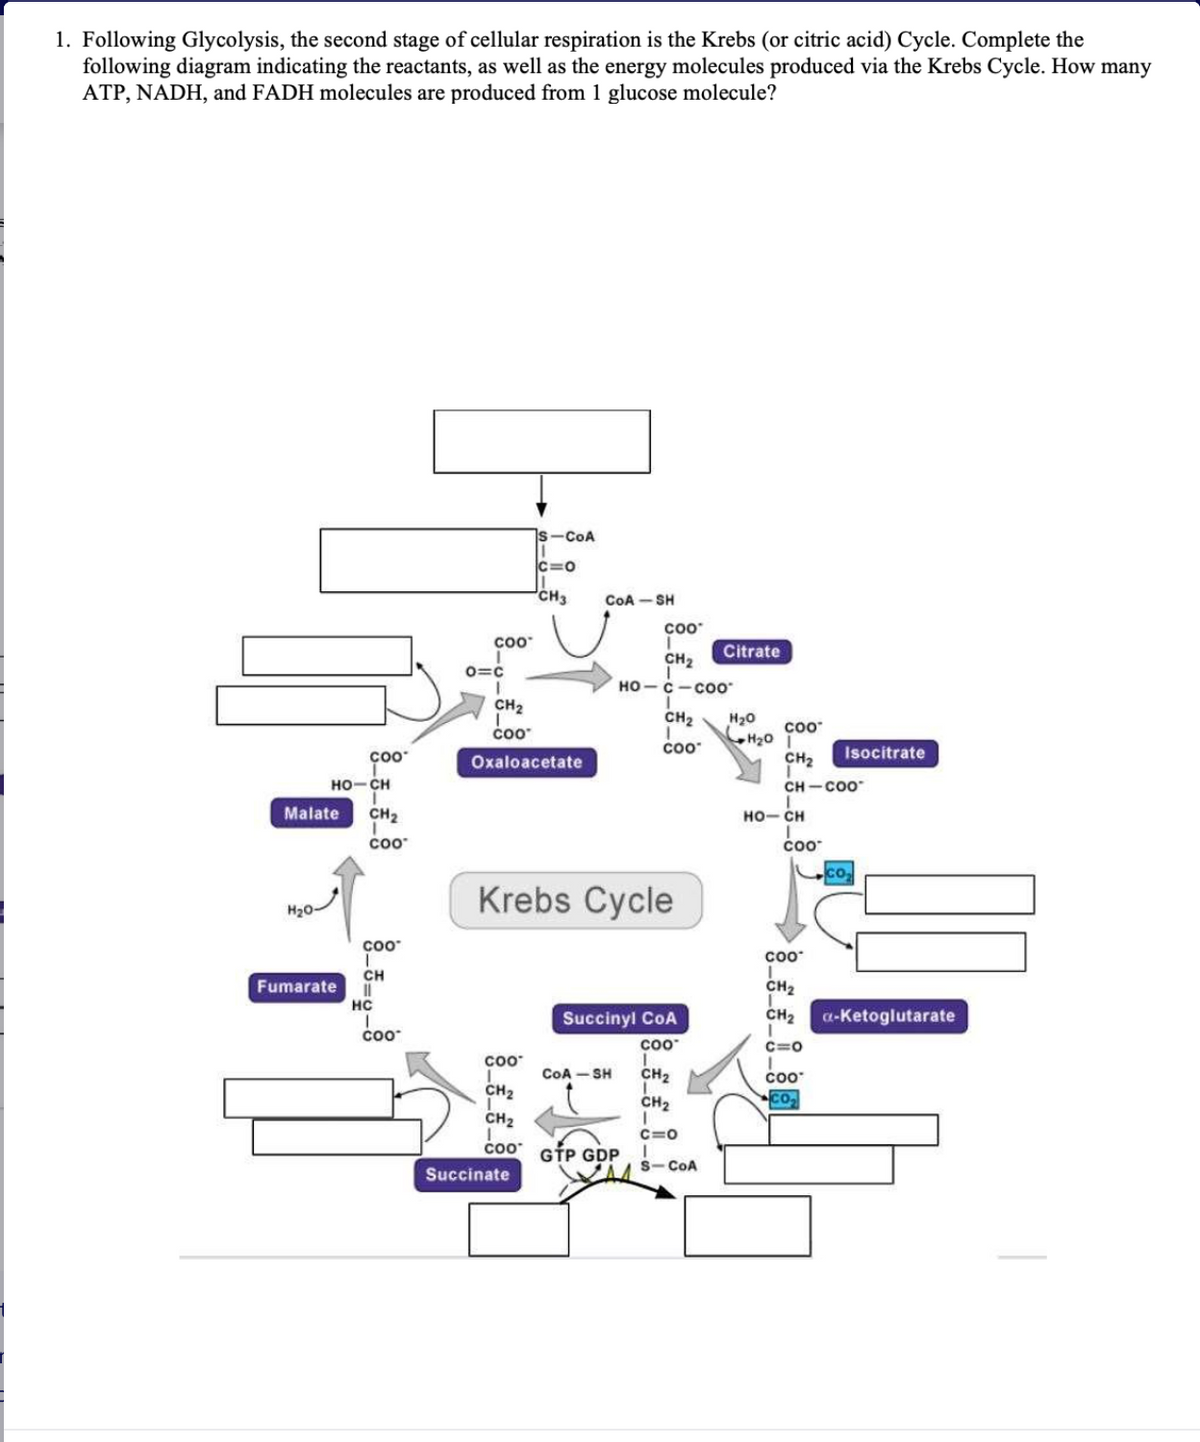 1. Following Glycolysis, the second stage of cellular respiration is the Krebs (or citric acid) Cycle. Complete the
following diagram indicating the reactants, as well as the energy molecules produced via the Krebs Cycle. How many
ATP, NADH, and FADH molecules are produced from 1 glucose molecule?
çoo
H₂0-
HỌCH
Malate CH₂
COO
COO™
CH
Fumarate 11
HC
COO
COO
0=C
CH₂
COO
Oxaloacetate
S-COA
C=0
CH3
COO™
I
CH₂
CH₂
coo
Succinate
CoA-SH
Krebs Cycle
COO
CH₂
HỌ— C — C00
COA-SH
Succinyl CoA
COO™
GTP GDP
CH₂ H₂O
1
COO
Citrate
CH₂
CH₂
1
C=O
I
S-CoA
H₂0
COO™
CH₂
CH-COO™
HỌ–CH
Isocitrate
COO™
Co.
COO™
I
CH₂
CH₂ a-ketoglutarate
C=O
COO
CO₂